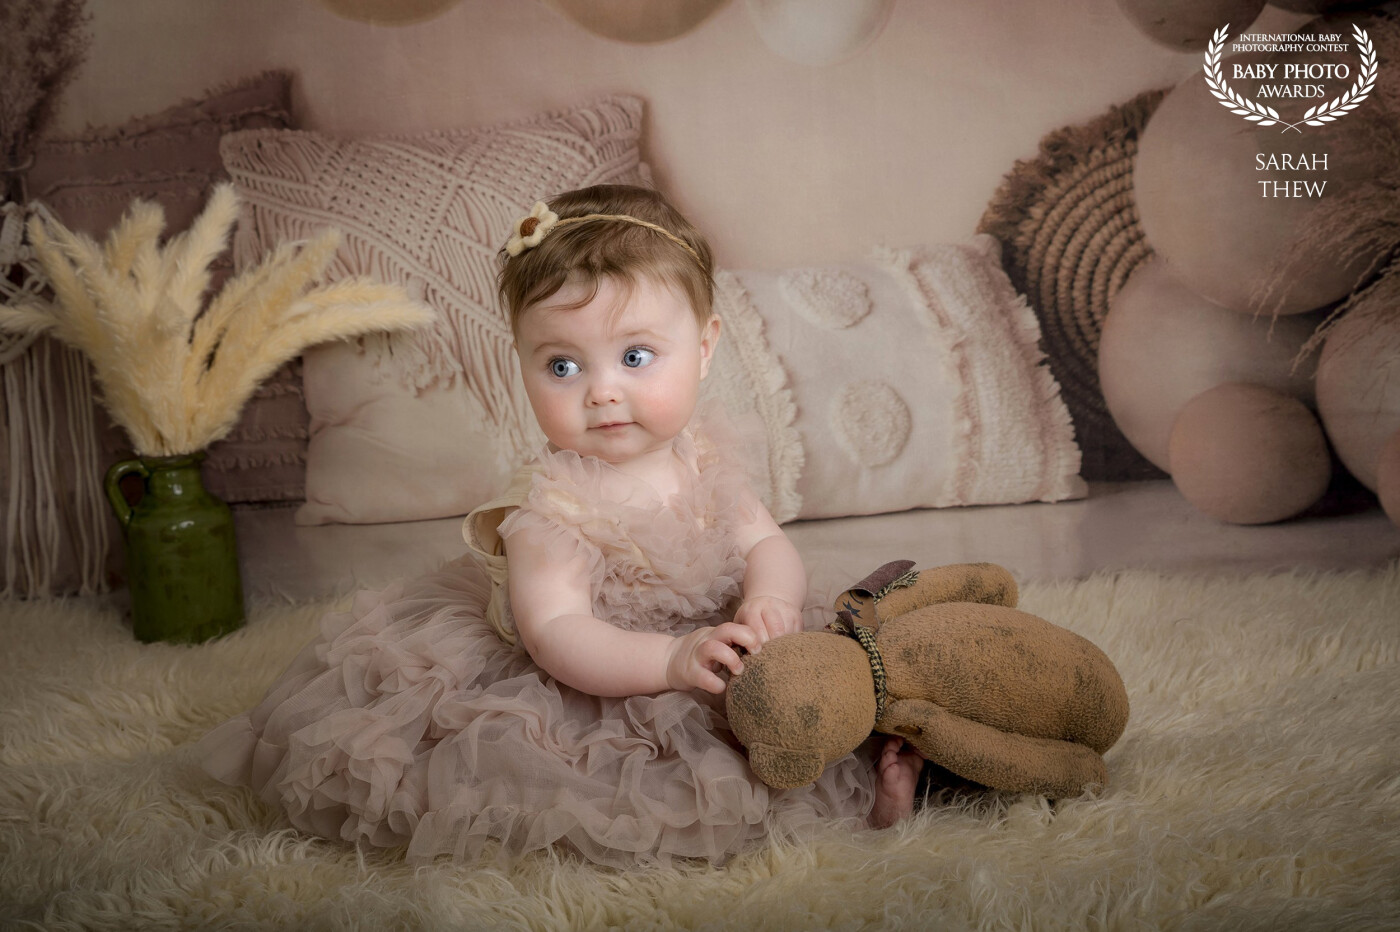 Adorable little Eden had the most beautiful eyes and loved the teddy in her photoshoot. A dream to photograph!